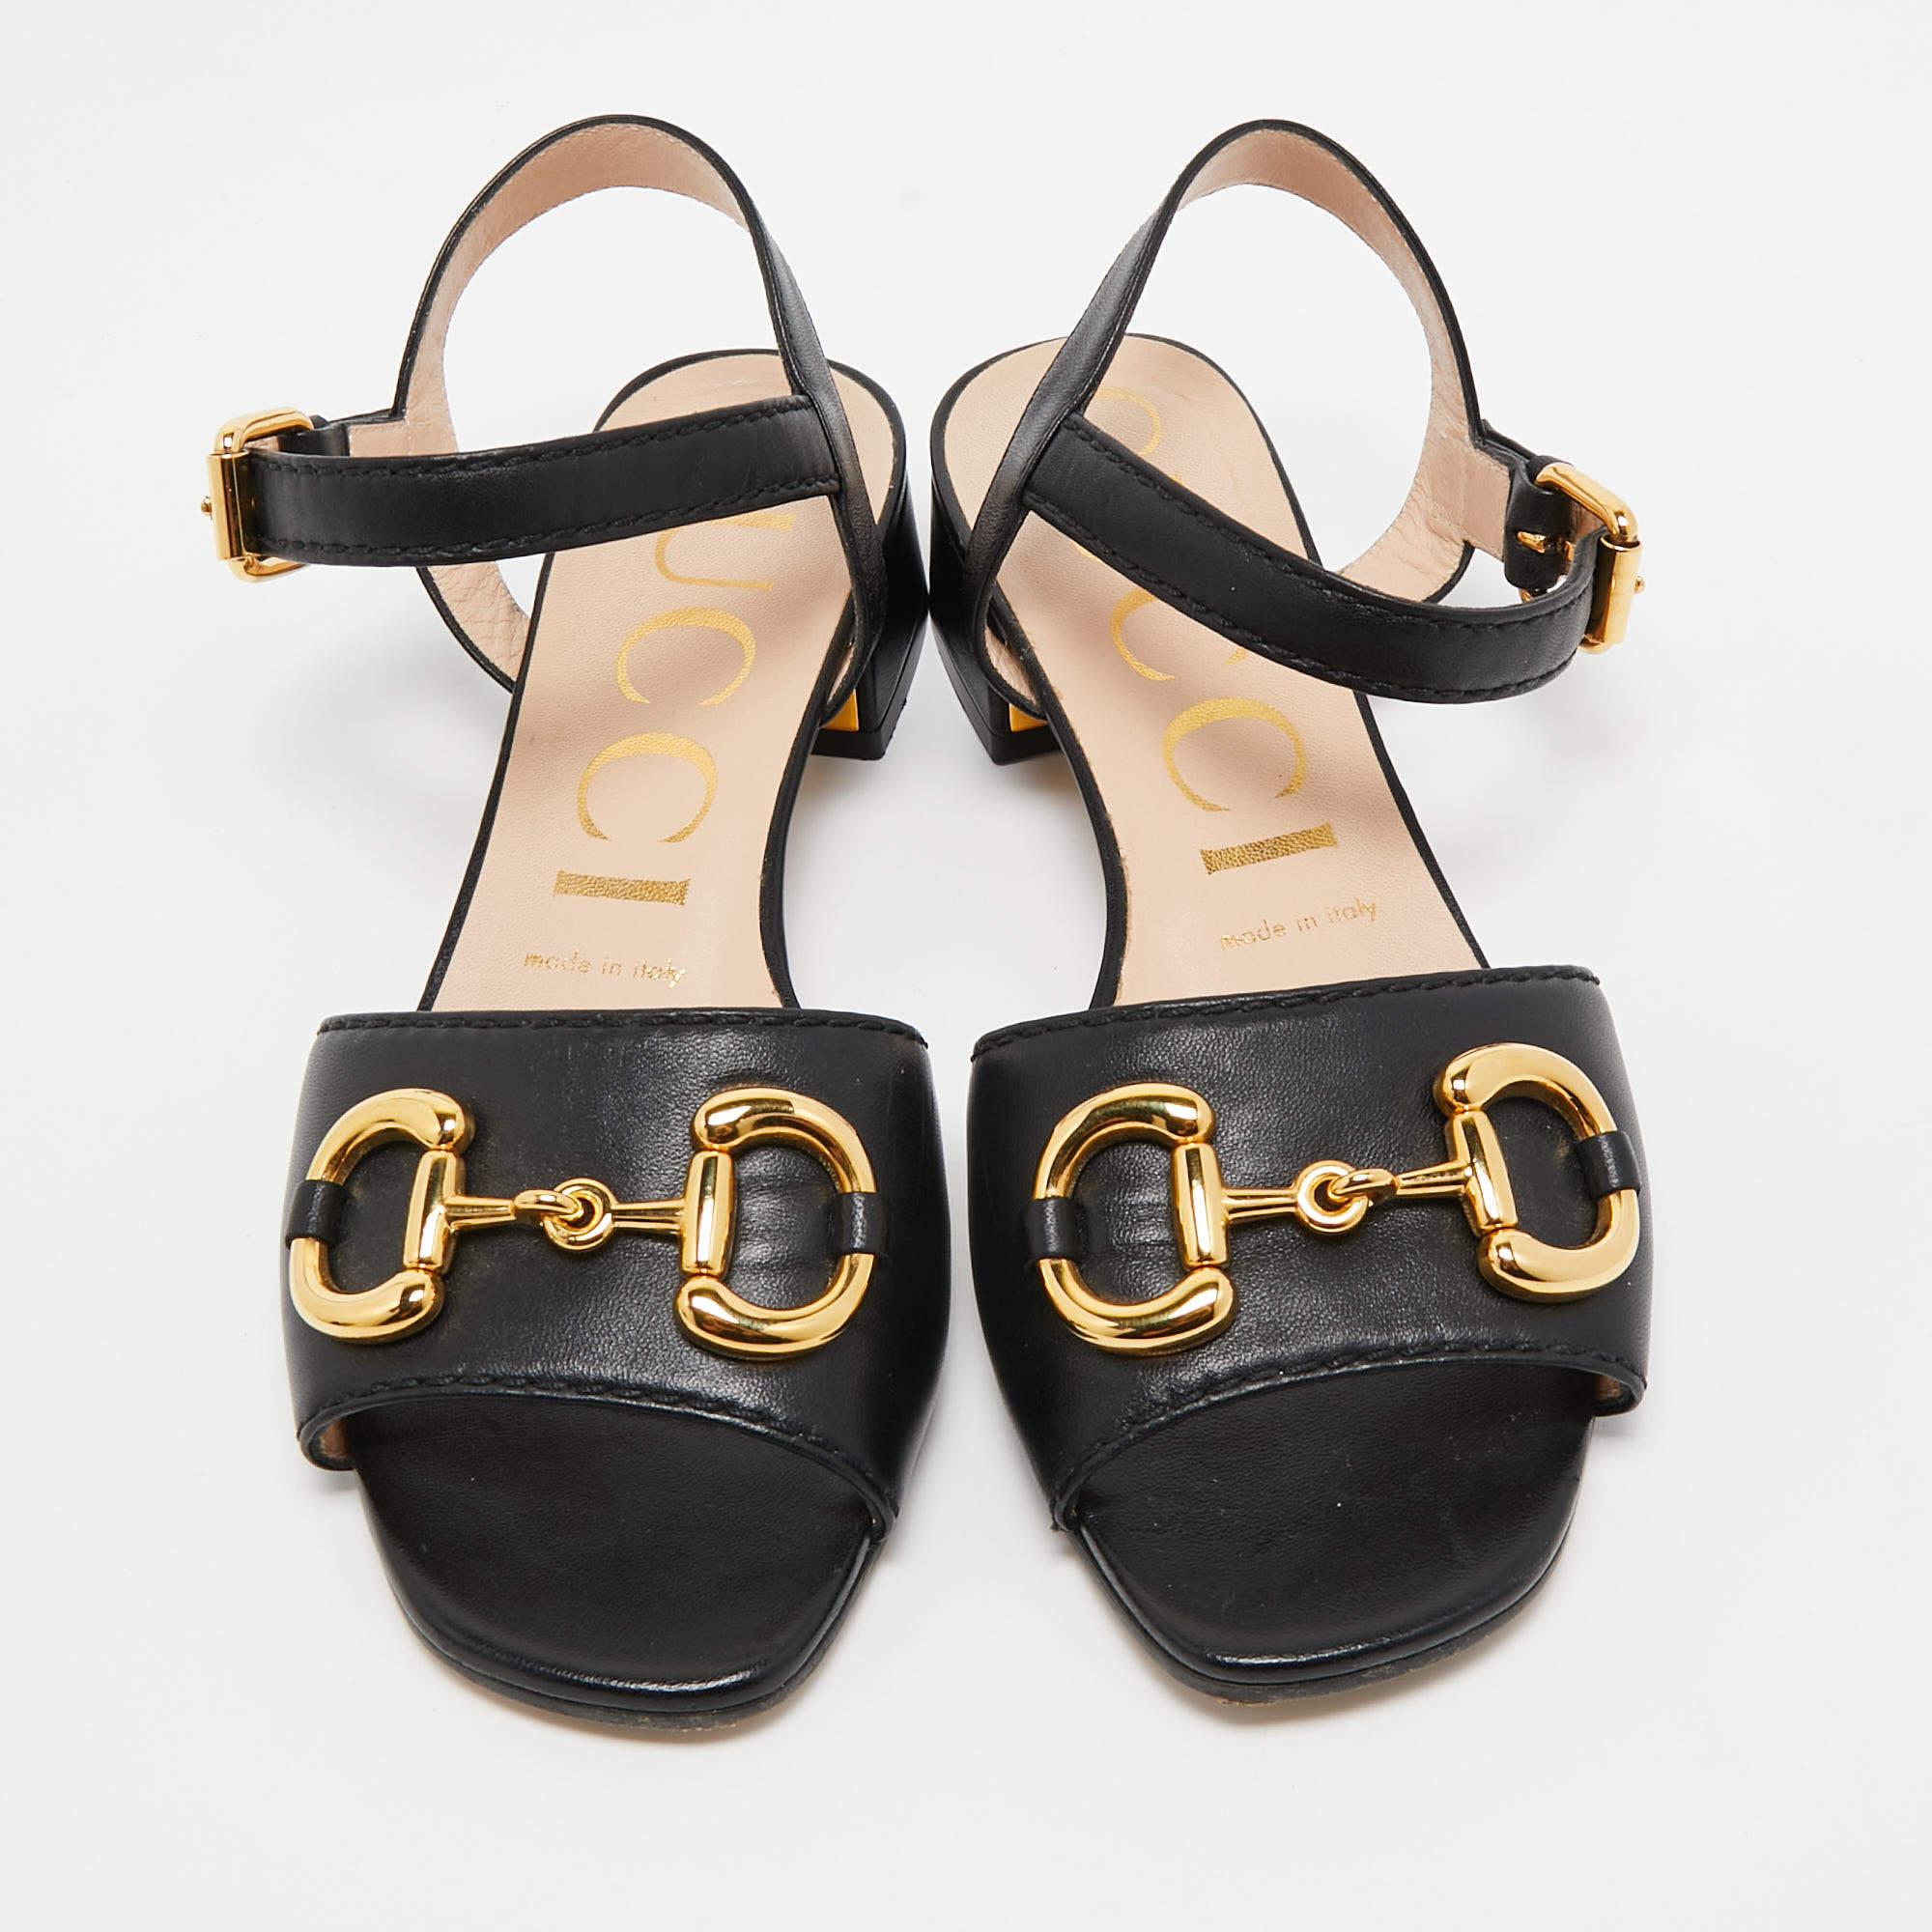 Elevate your ensemble with these Gucci Horsebit sandals for women. Meticulously crafted, they combine luxury and comfort, creating a statement pair that's both fashionable and fabulous for every occasion.

Includes: Original Dustbag, Original Box